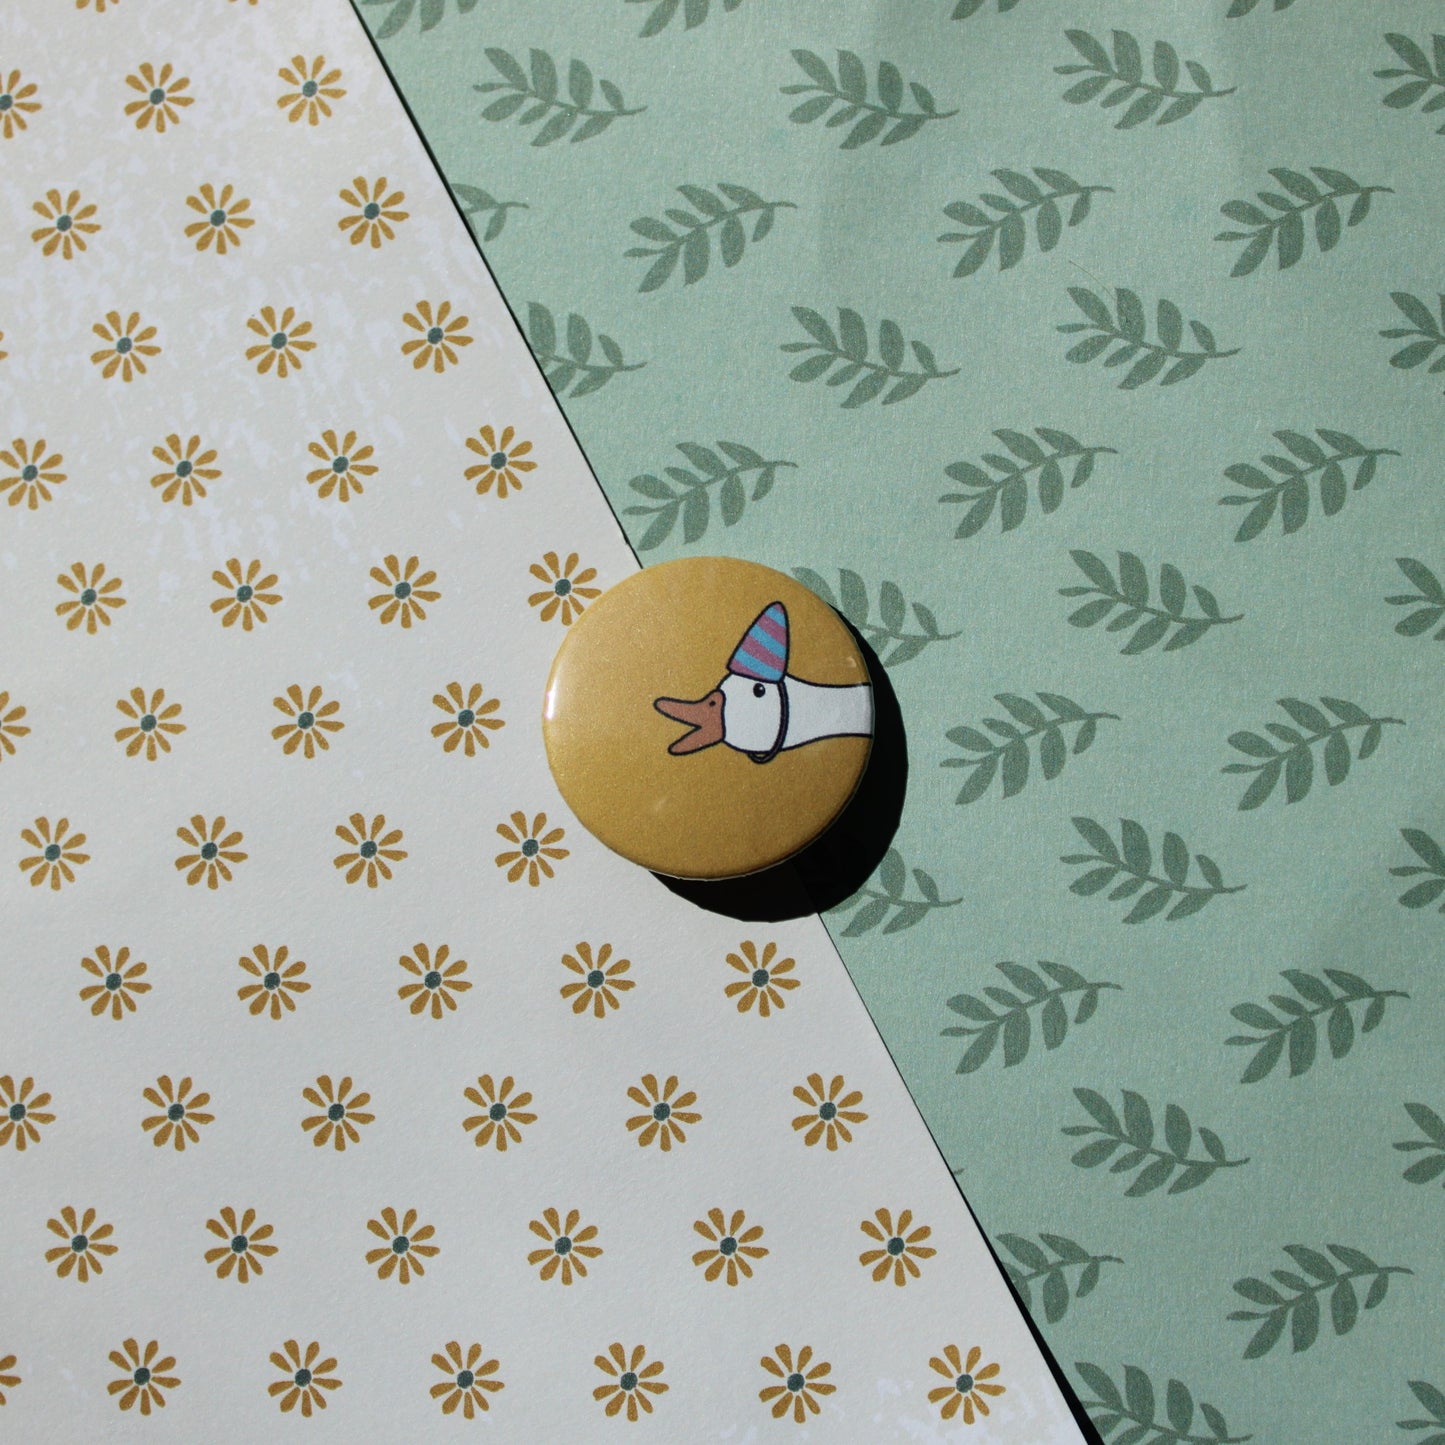 A floral and leaf background with a yellow circle button with a white goose head honking with a purple and blue striped party hat.